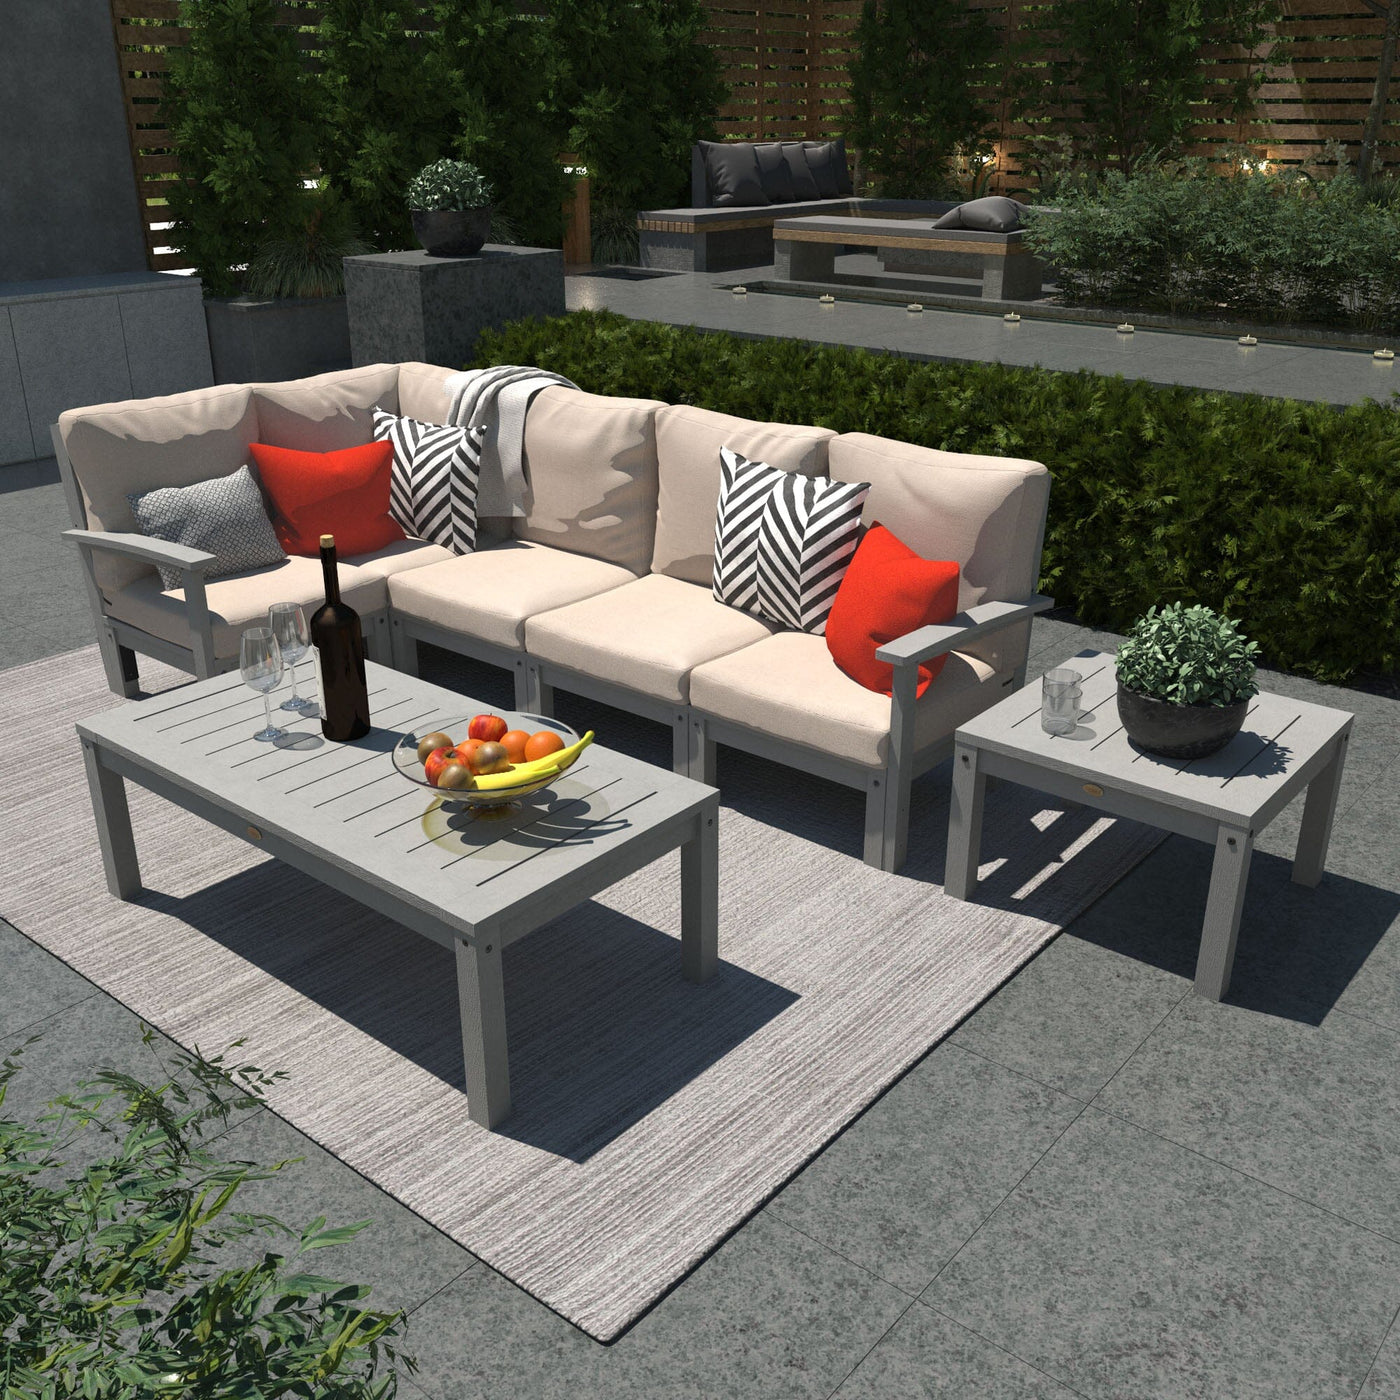 Bespoke Deep Seating: 7 Piece Sectional Set with Conversation and Side Table Deep Seating Highwood USA 